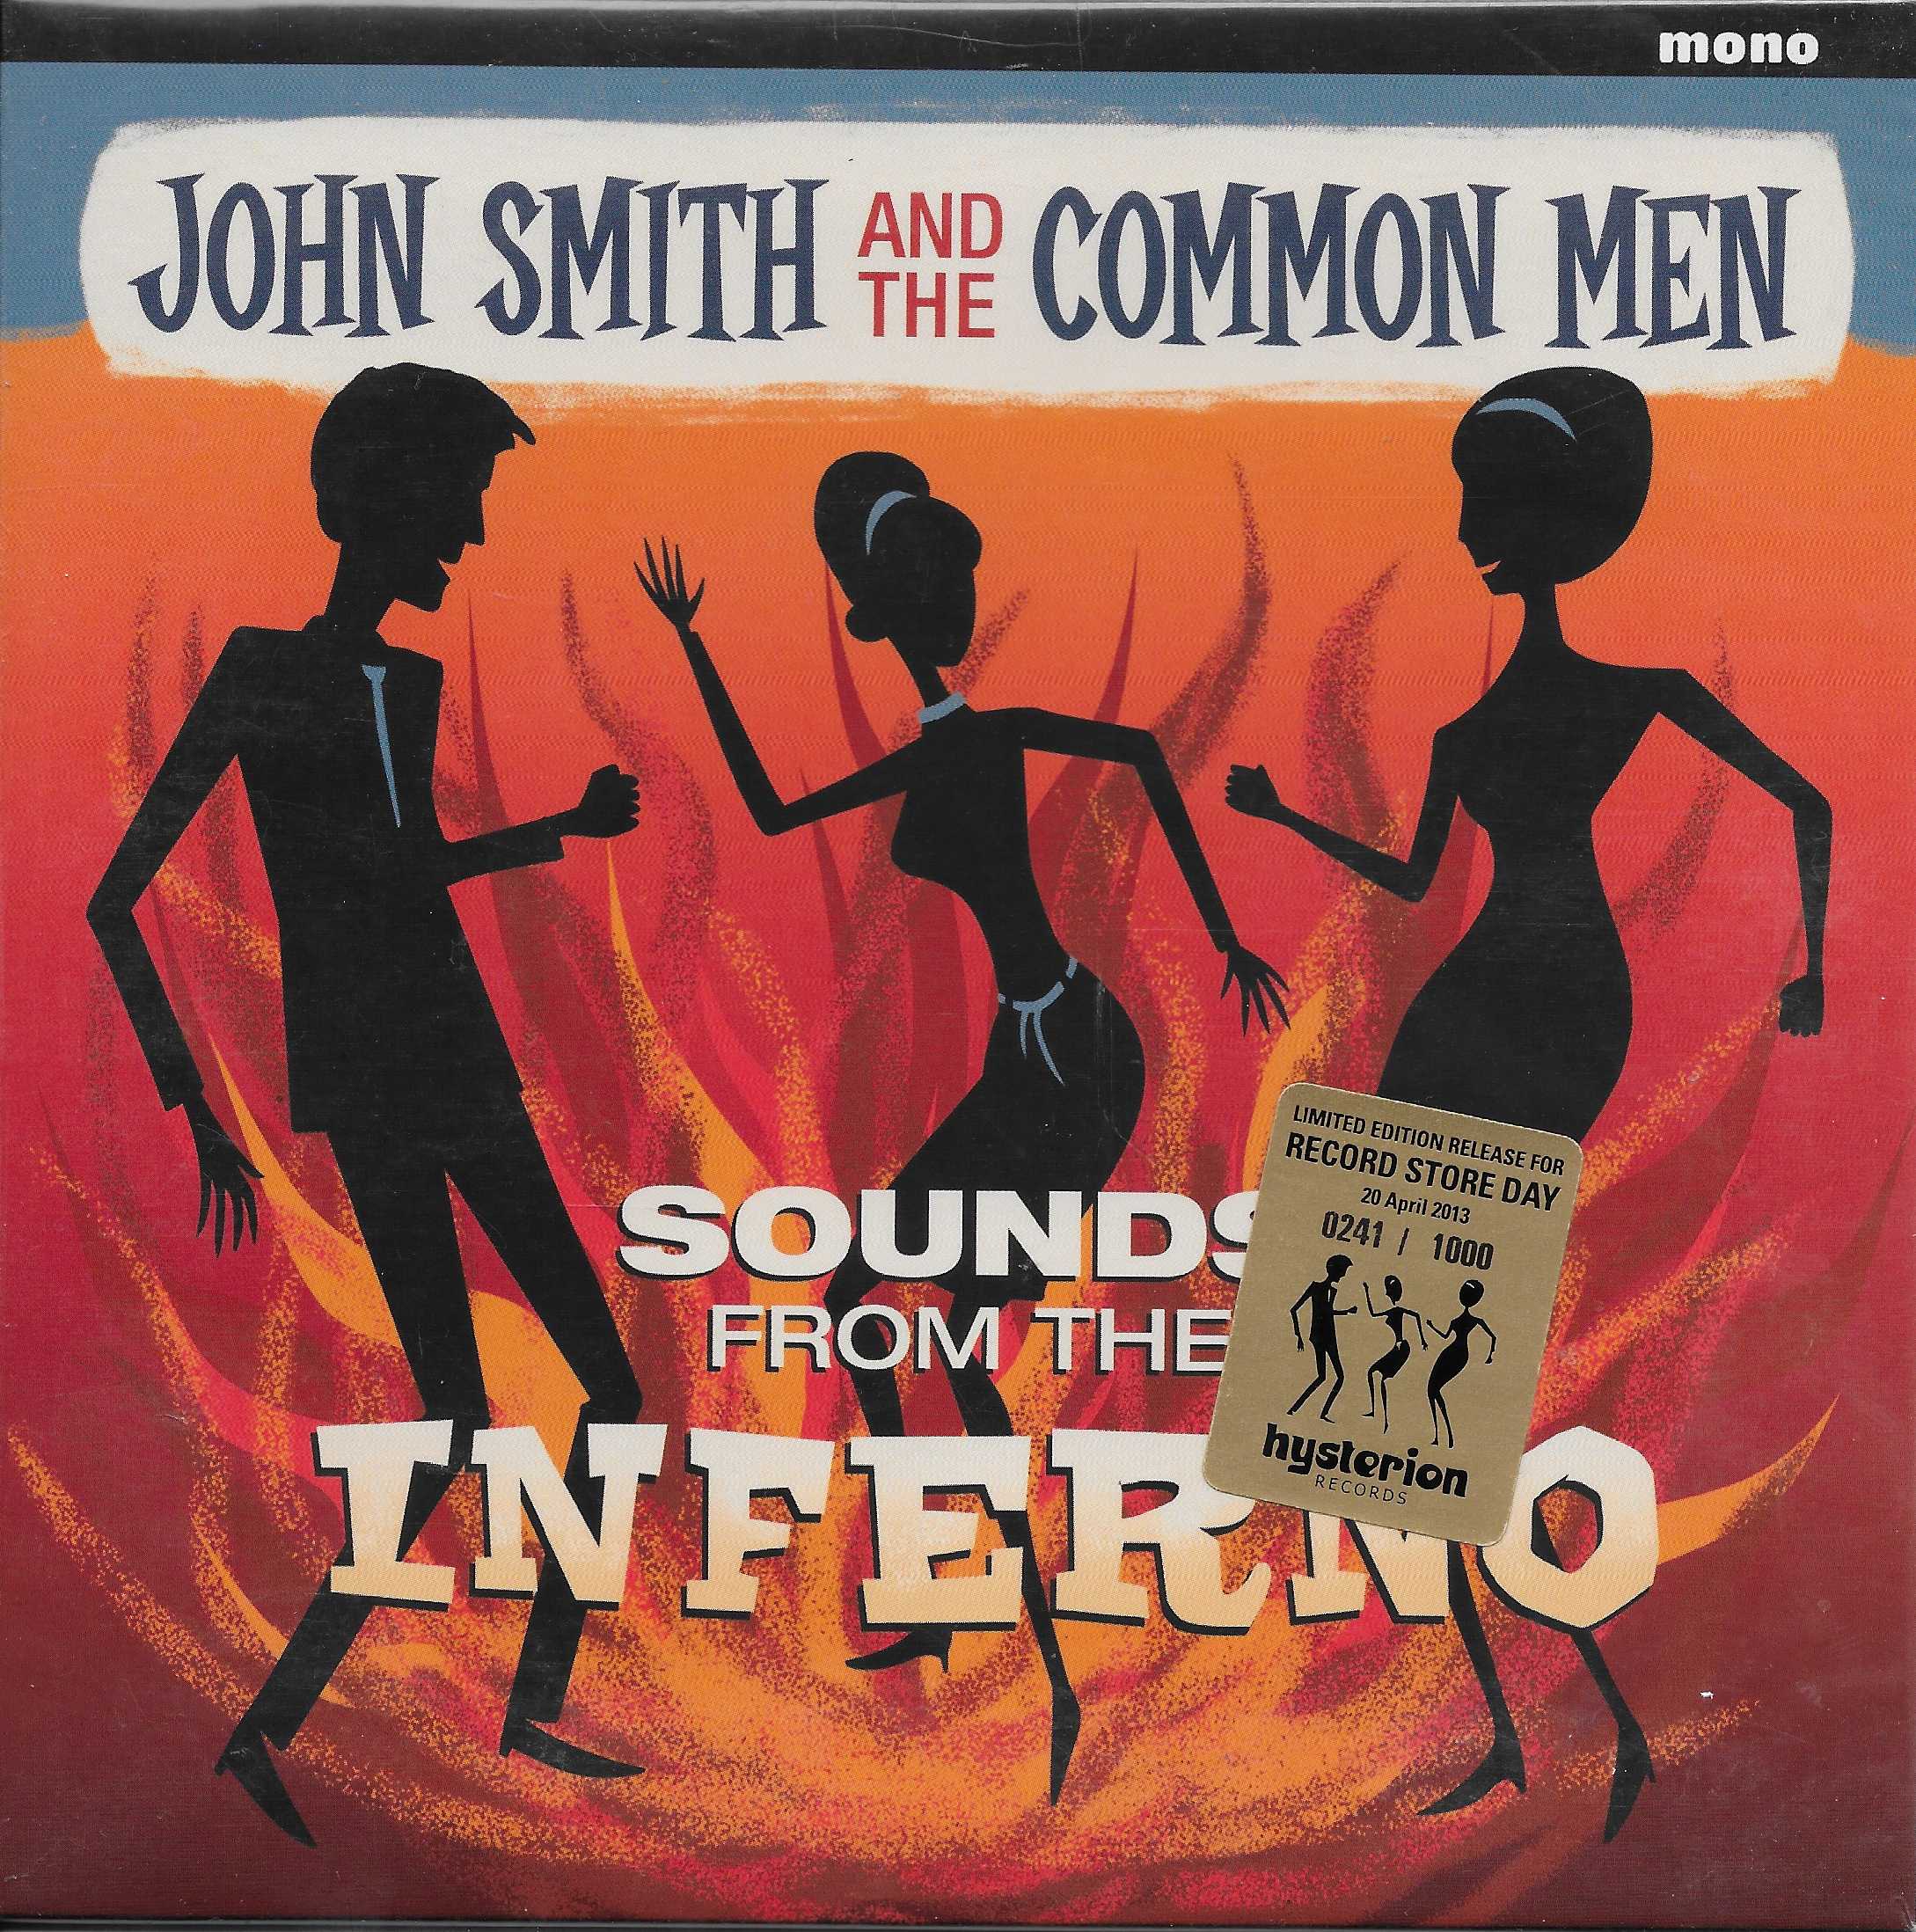 Picture of Sounds from the inferno - Record Store Day 2013 by artist John Smith and the Common Men from the BBC singles - Records and Tapes library